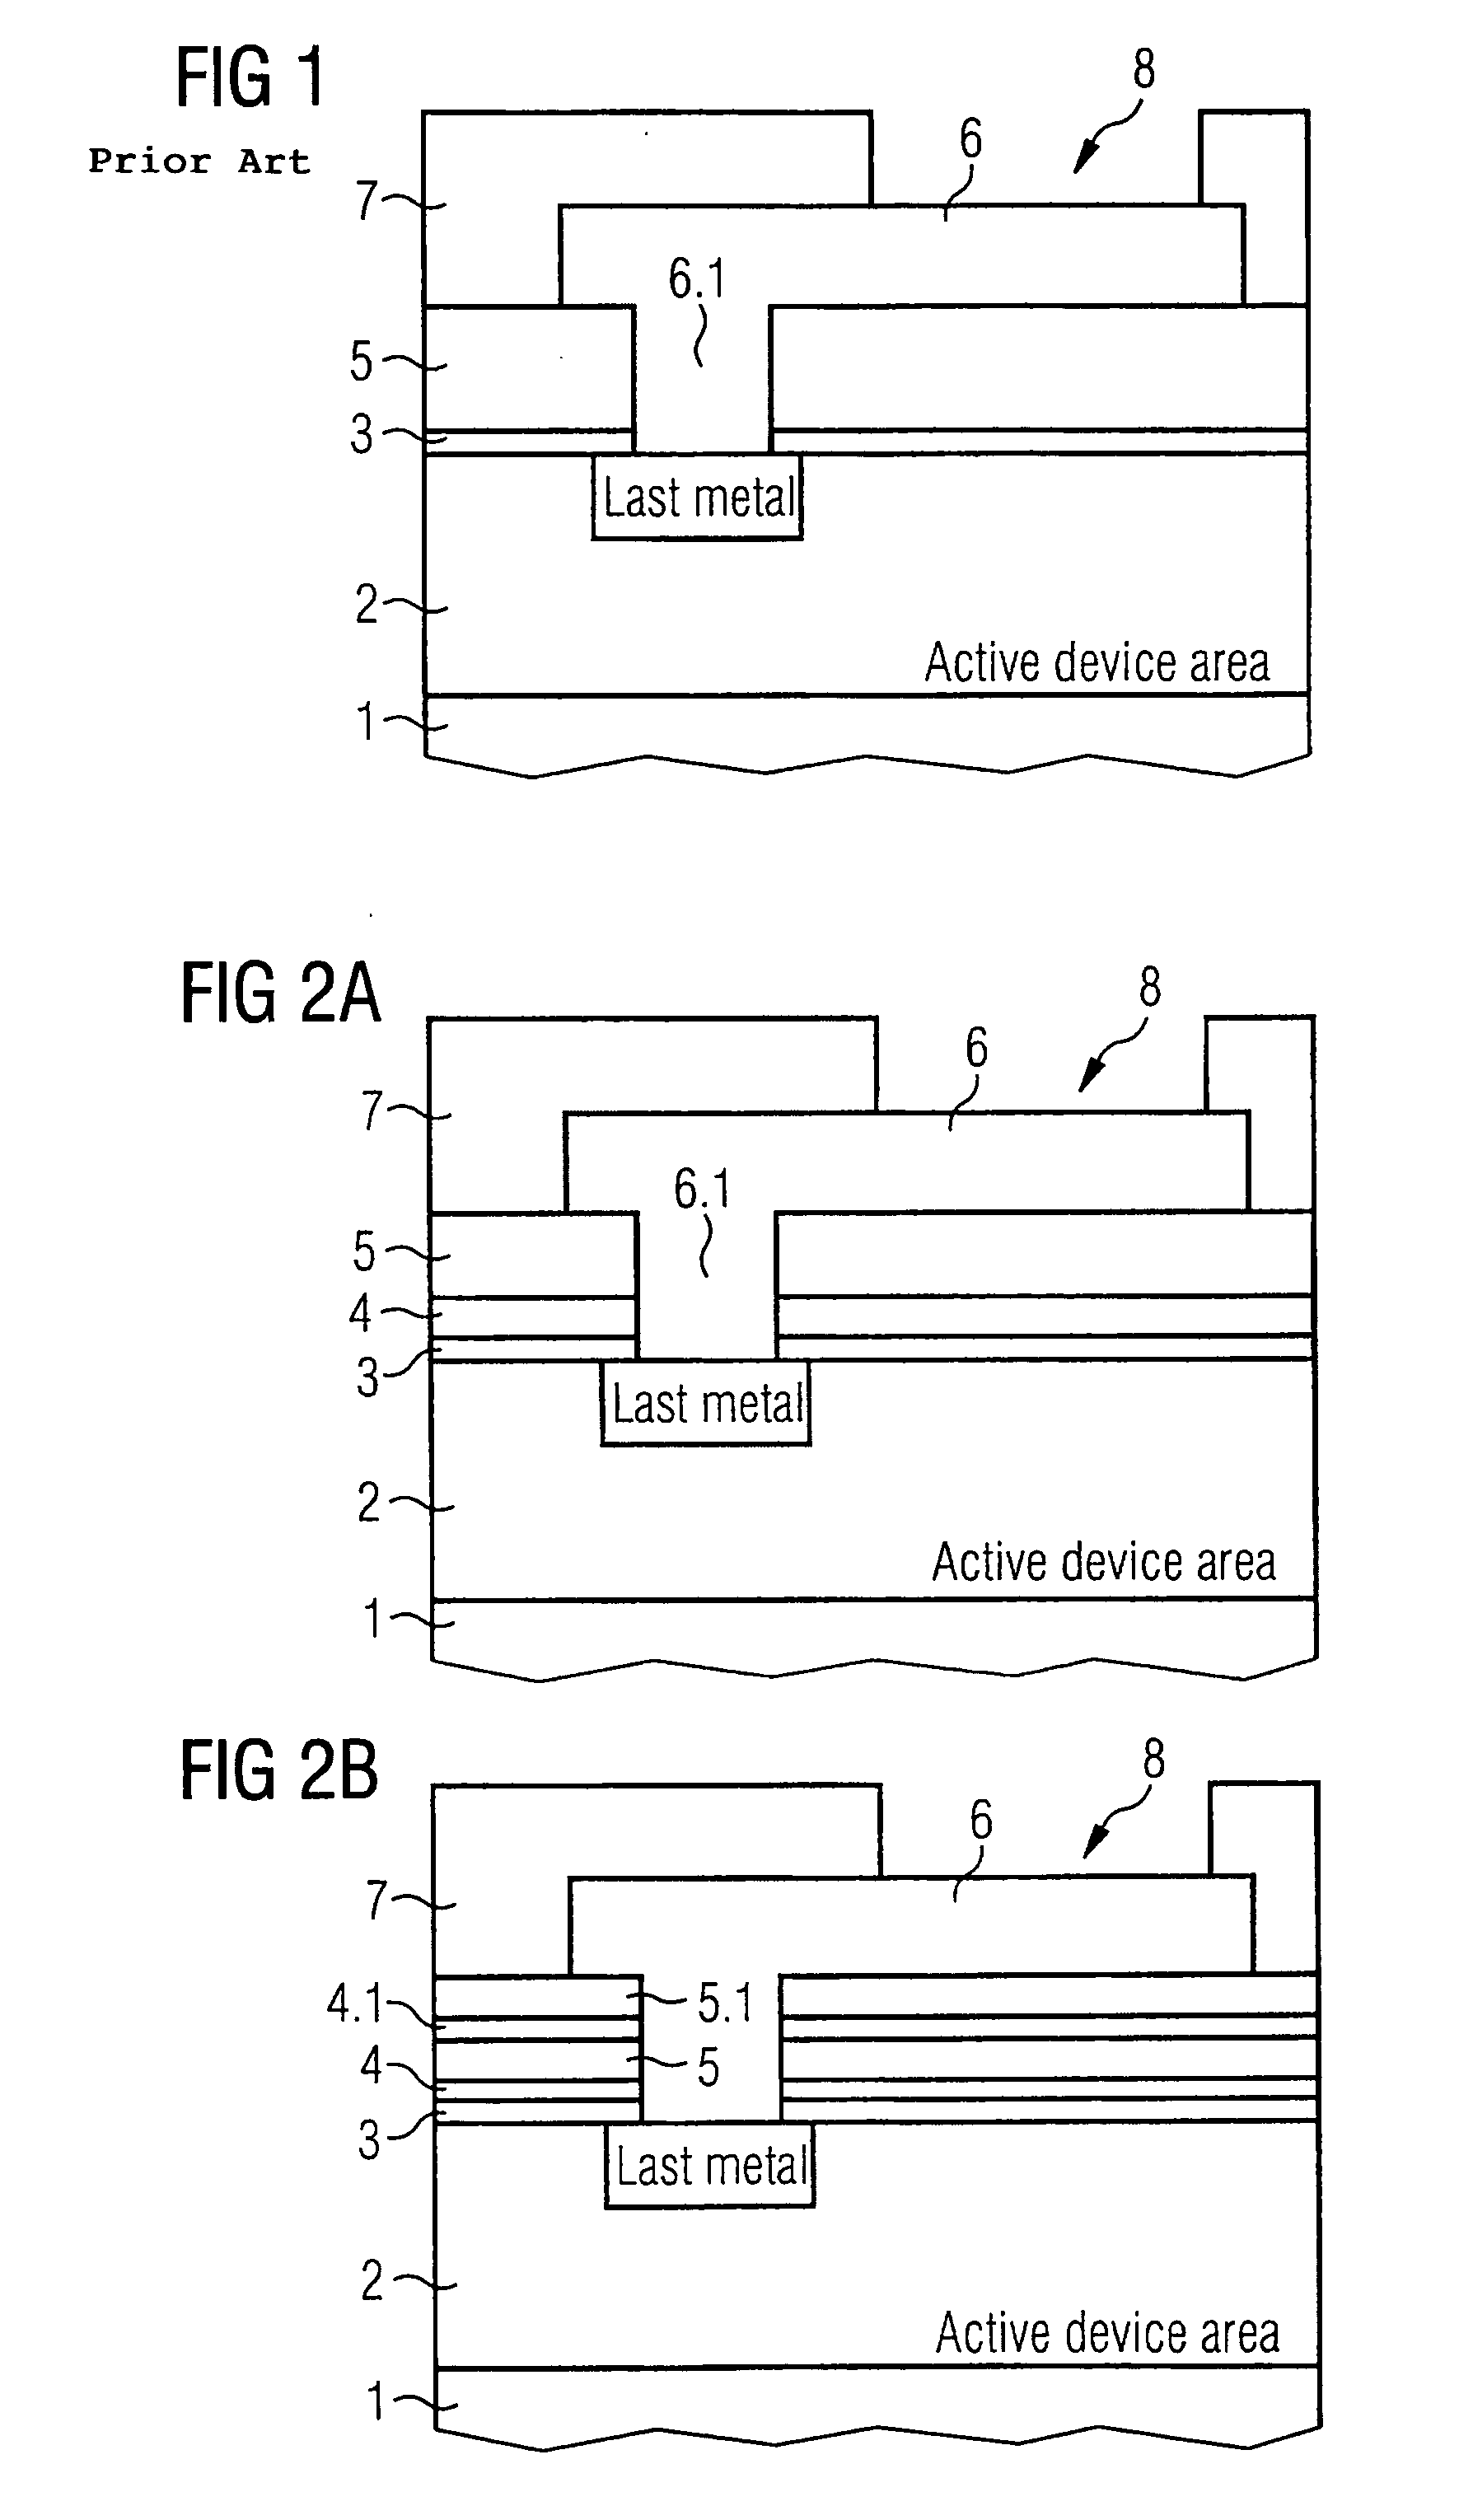 Final passivation scheme for integrated circuits